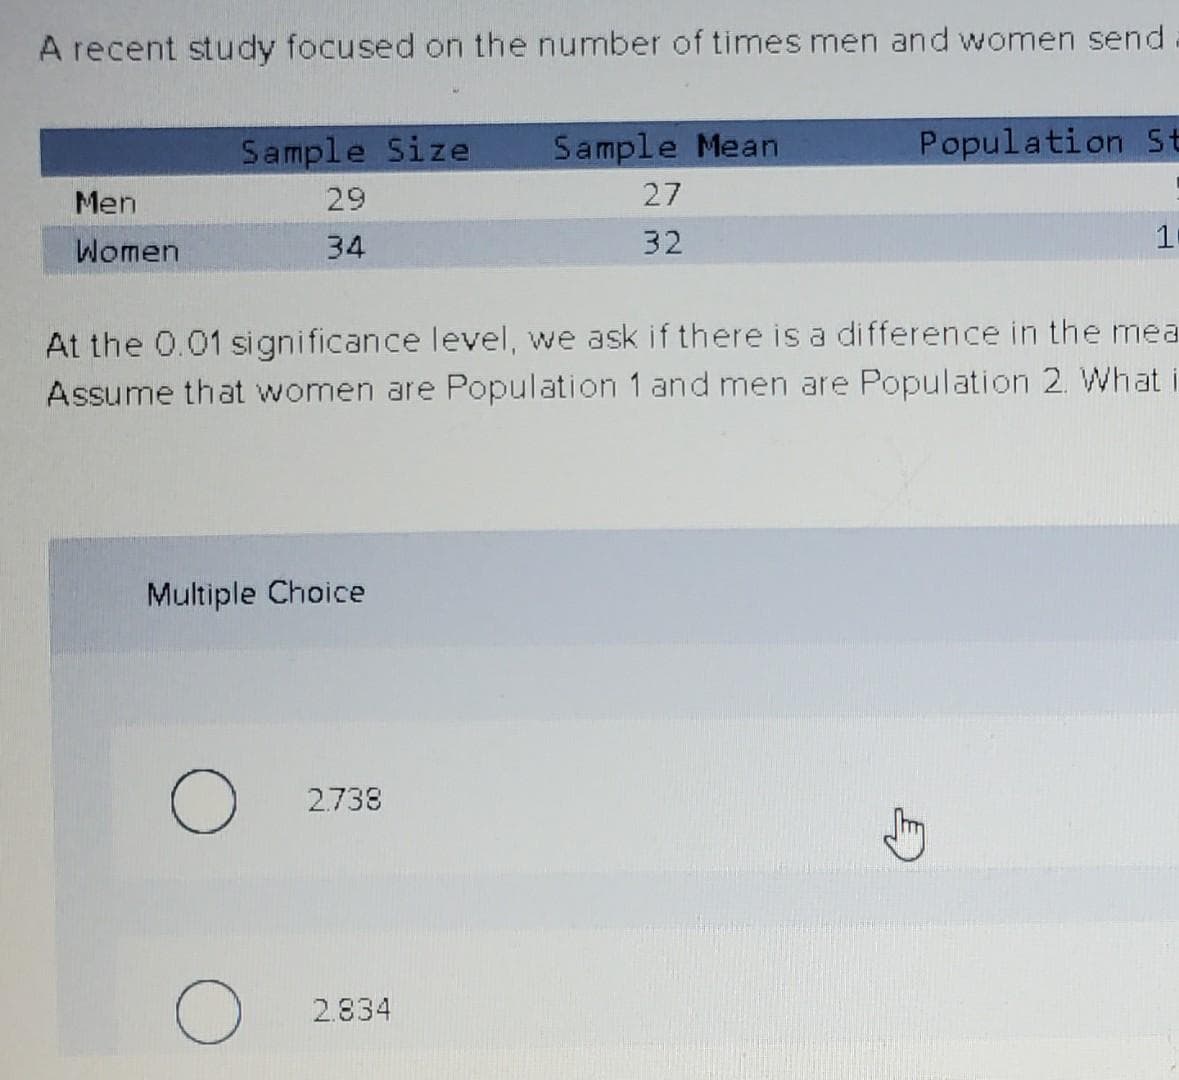 A recent study focused on the number of times men and women send
Sample Size
Sample Mean
Population St
Men
29
27
Women
34
32
At the 0.01 significance level, we ask if there is a difference in the mea
Assume that women are Population 1 and men are Population 2. What i
Multiple Choice
2.738
2.834
